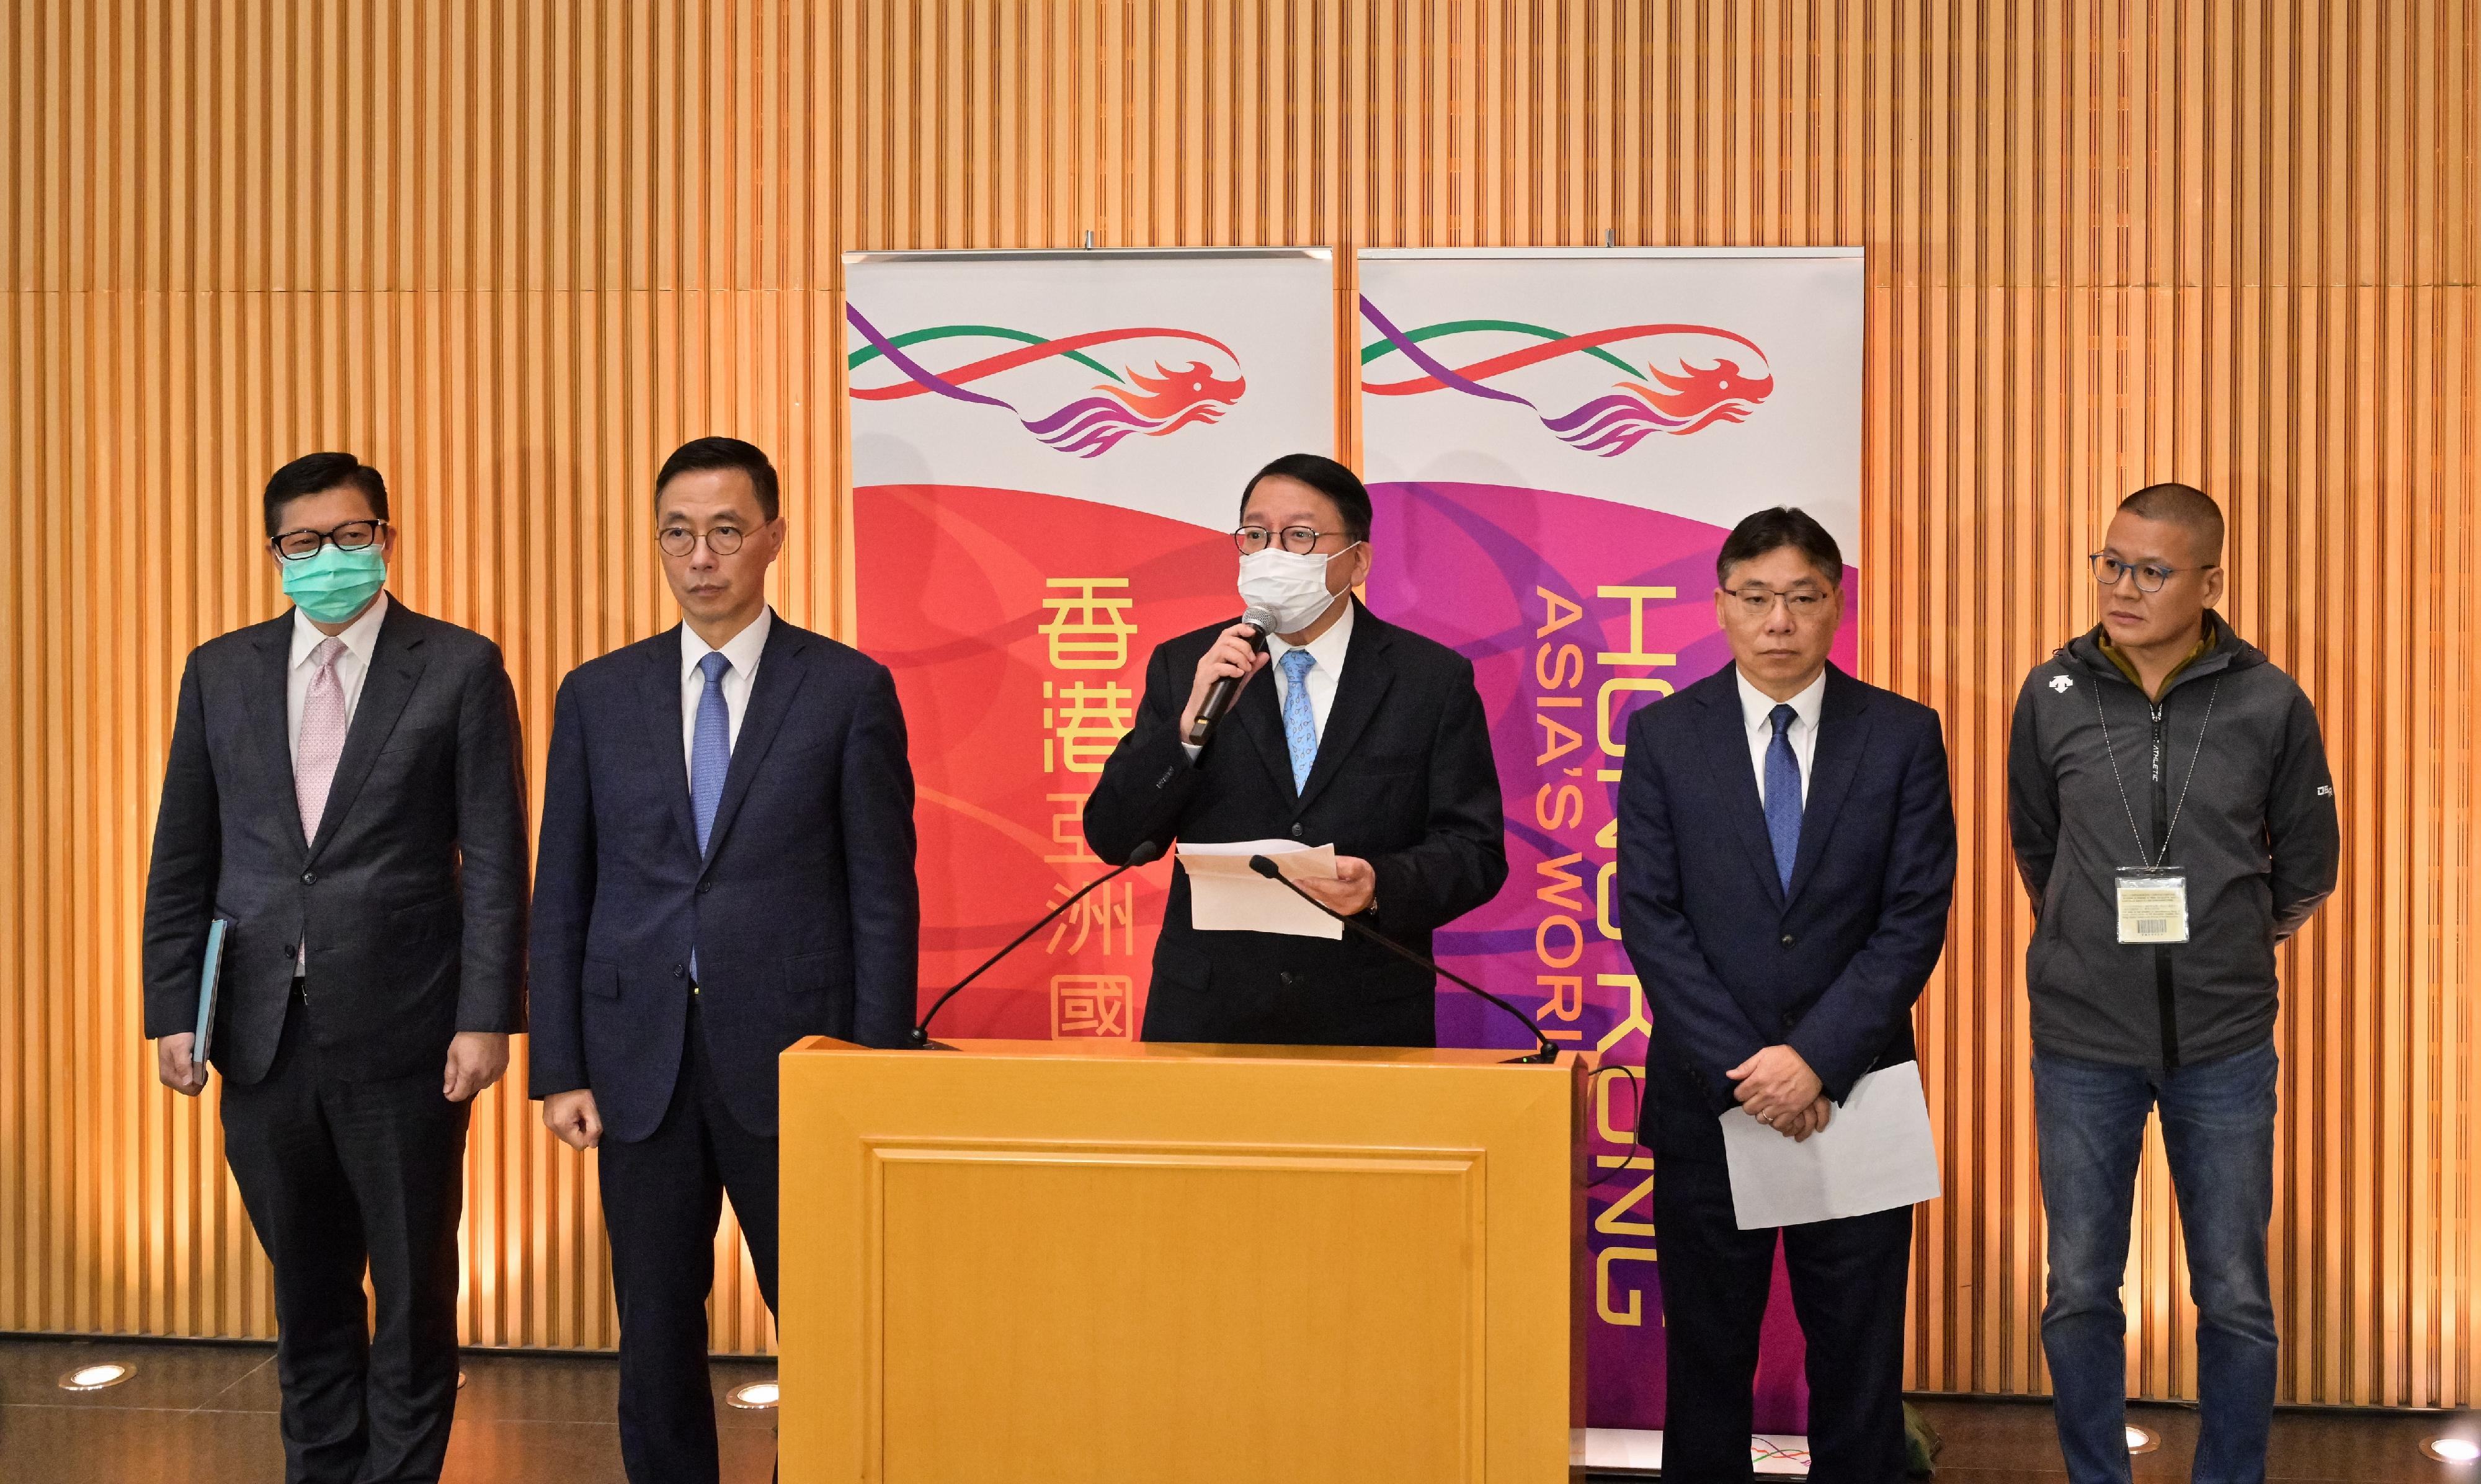 The Chief Secretary for Administration, Mr Chan Kwok-ki (centre), together with the Secretary for Culture, Sports and Tourism, Mr Kevin Yeung (second left); the Secretary for Security, Mr Tang Ping-keung (first left); the Secretary for Transport and Logistics, Mr Lam Sai-hung (second right); and the Secretary of the Hong Kong Guangdong Boundary Crossing Bus Association, Mr Freeman Cheung (first right), meet the media today (January 2).